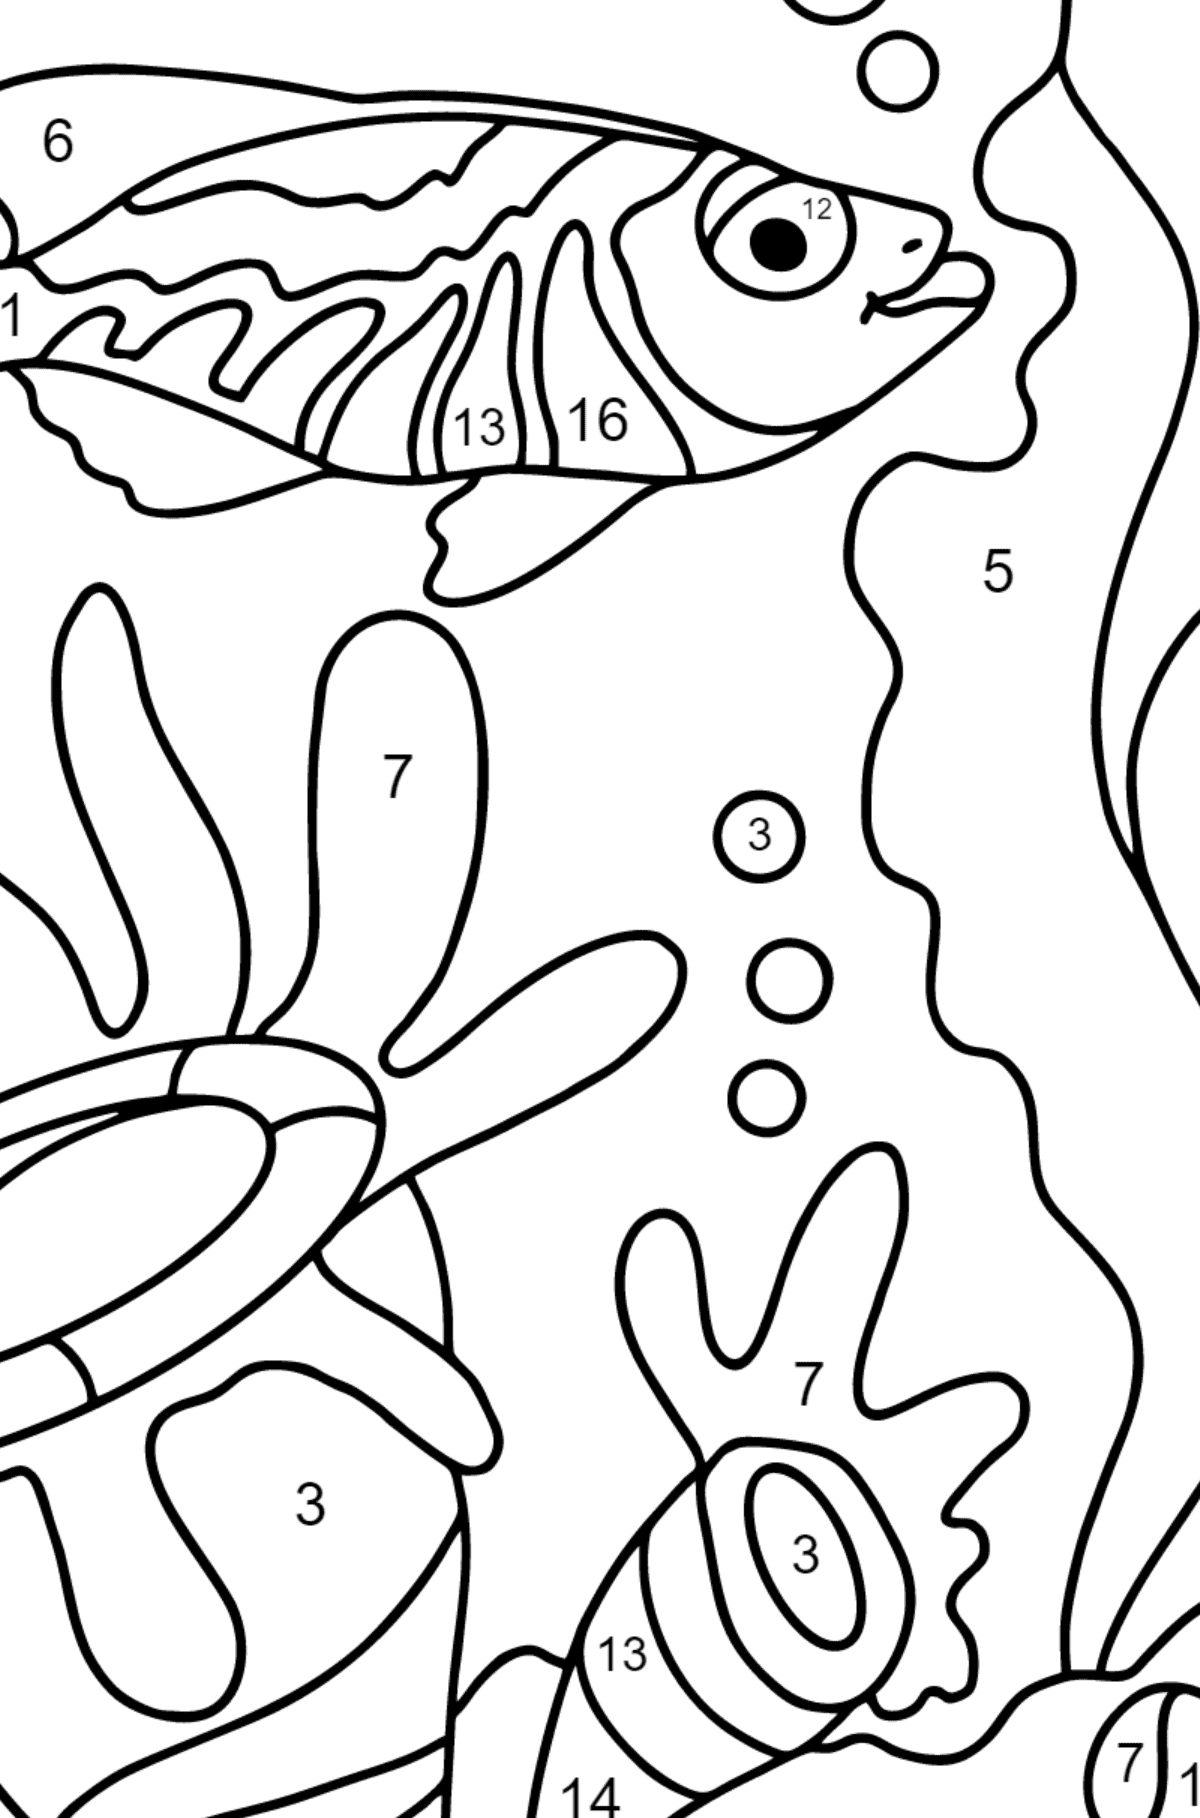 Coloring Page - A Fish is Admiring the Corals - Coloring by Numbers for Kids